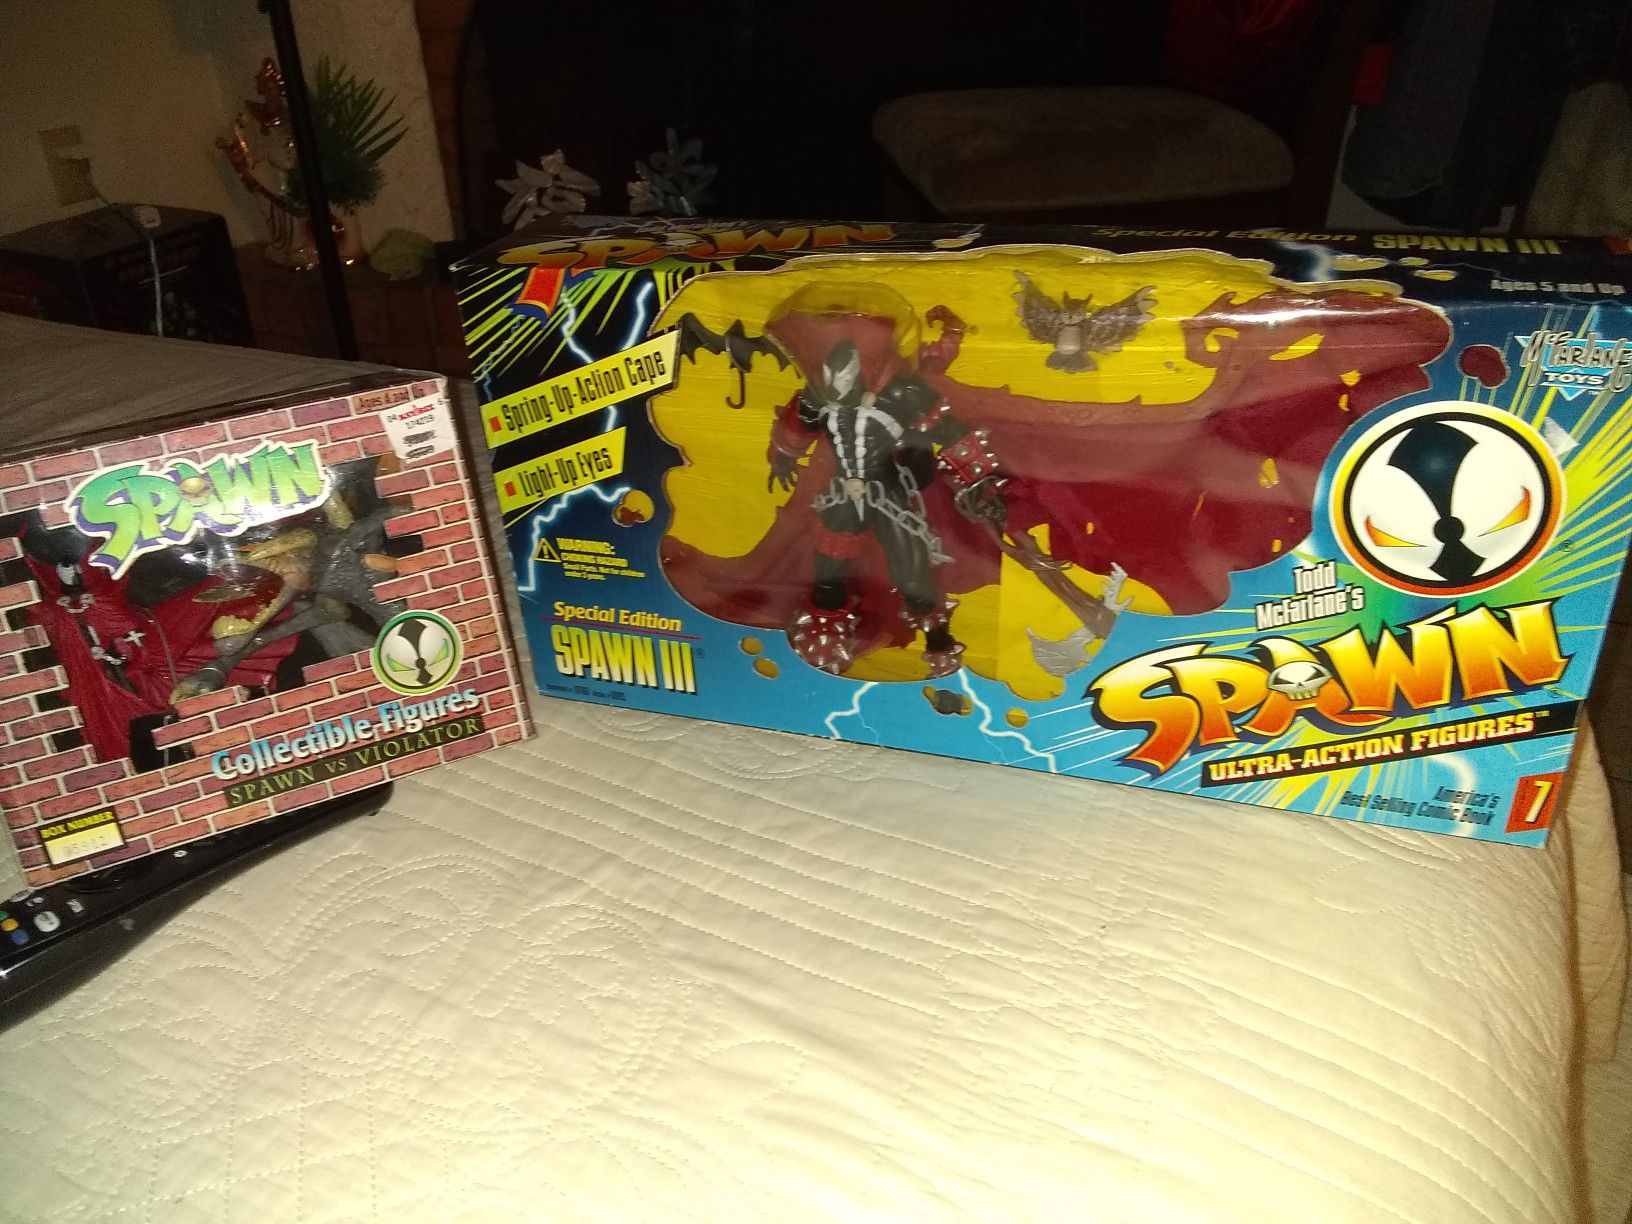 $25.00 FOR BOTH OF THESE SPAWN COLLECTION ACTION FIGURES,, BRAND NEW SEALED NEVER OPENED.